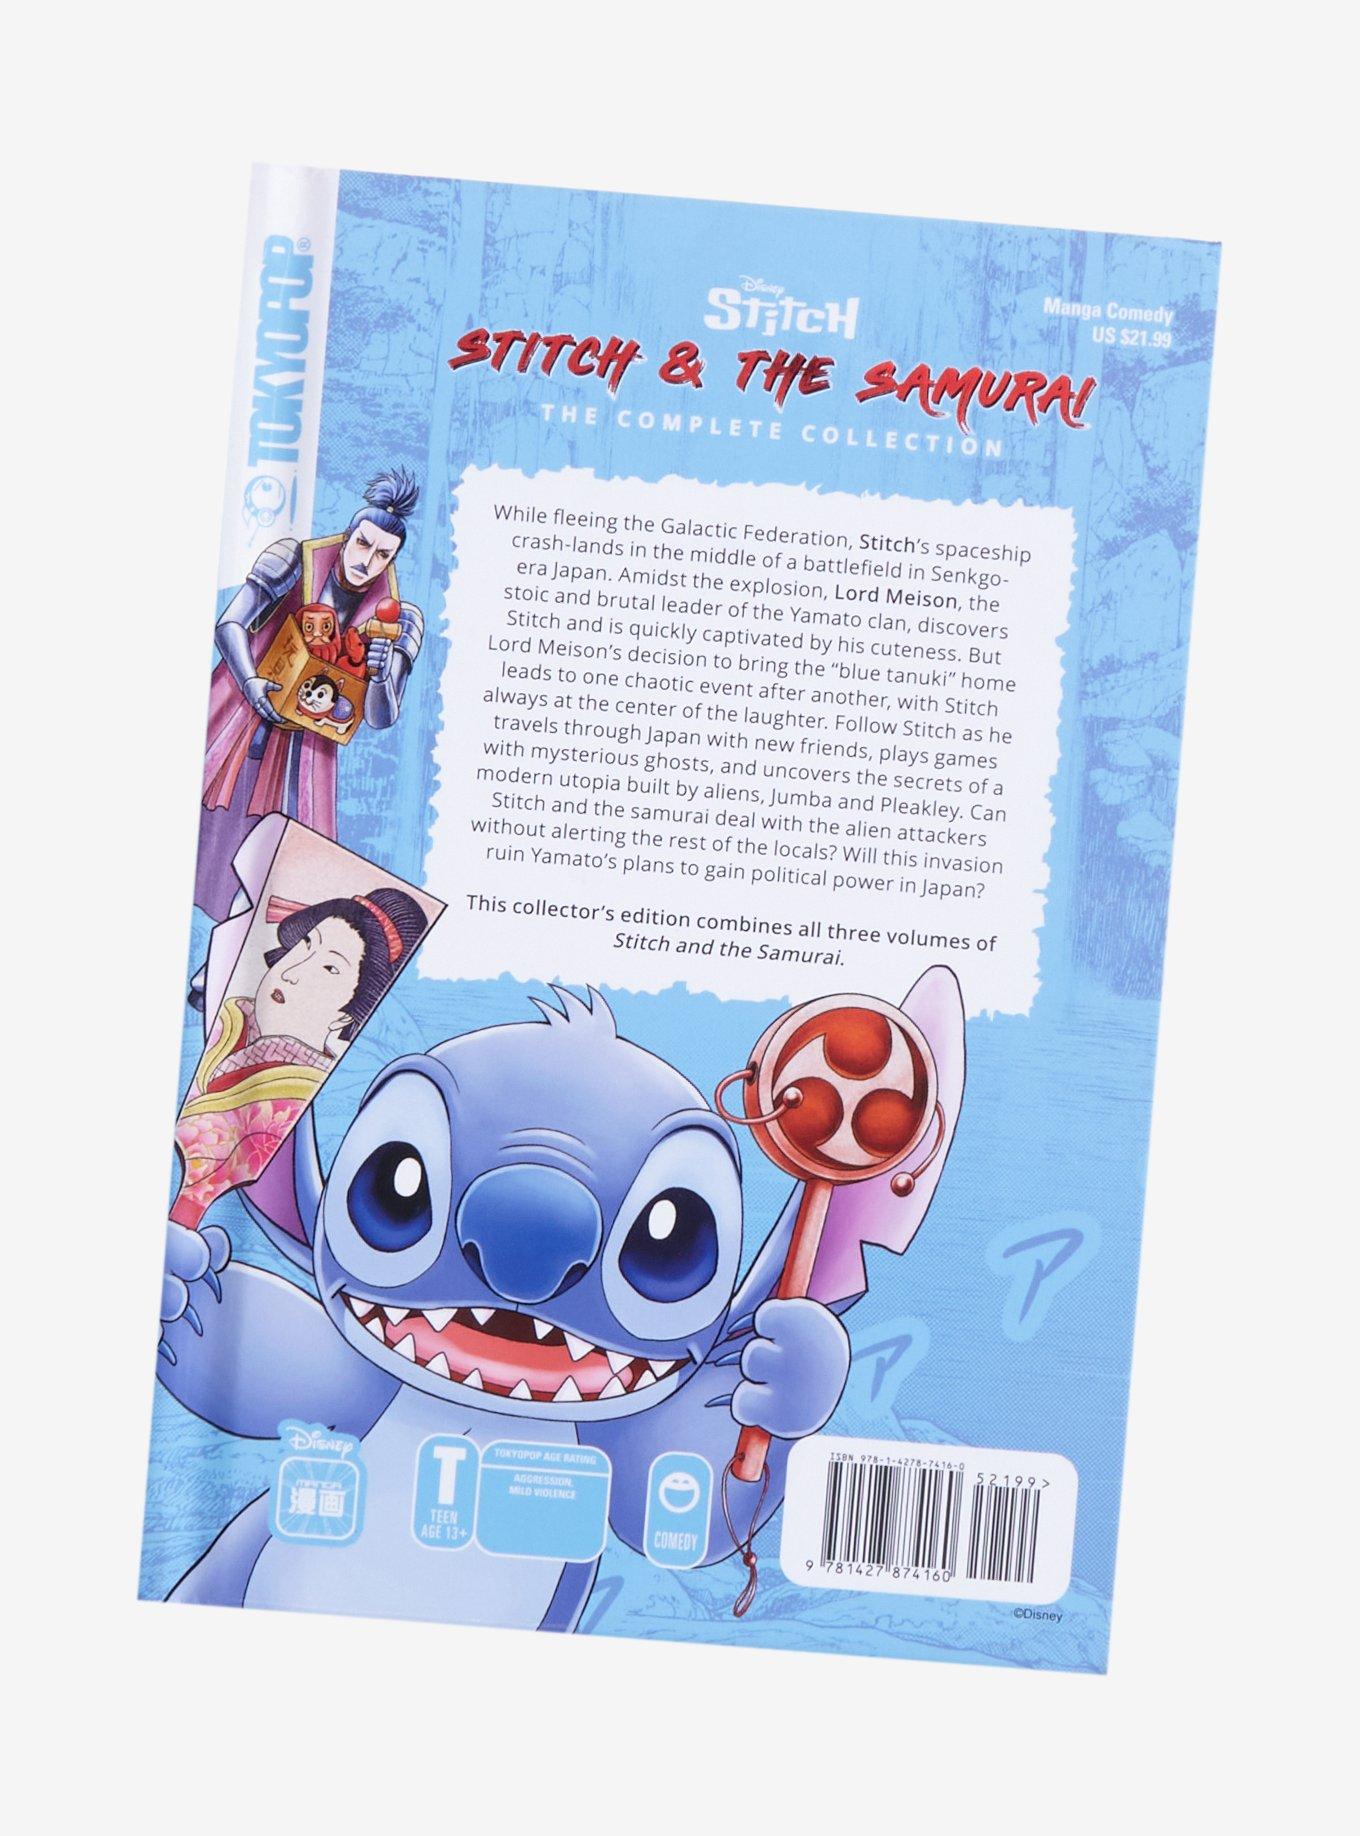 Hot Topic Disney Stitch And The Samuari: The Complete Collection Hardcover  Manga